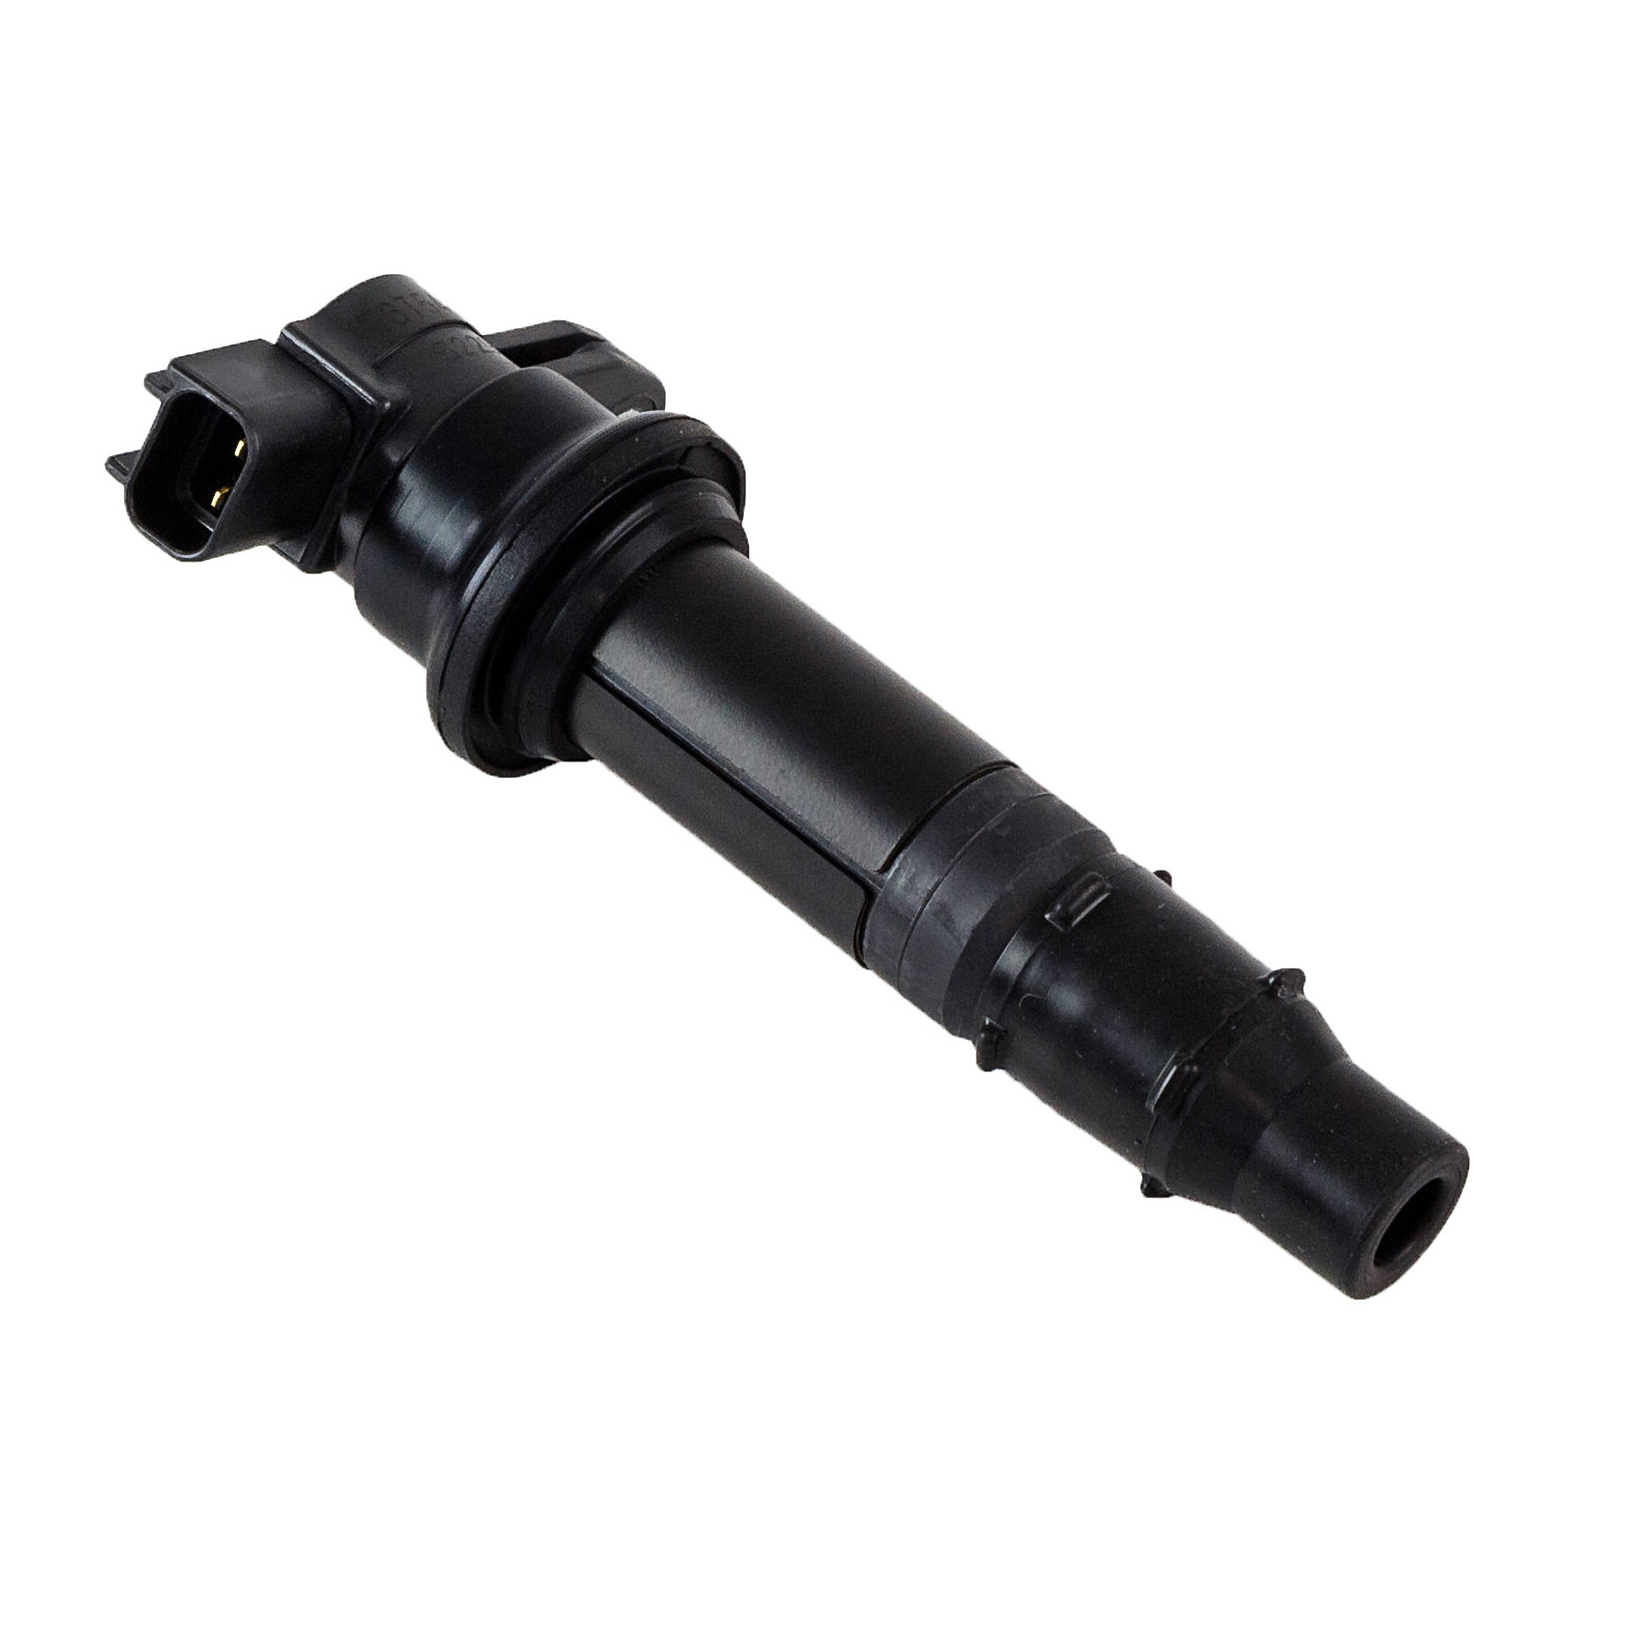 Катушка зажигания / ignition coil A270906050064 MERCEDES-BENZ ignition coil w switch